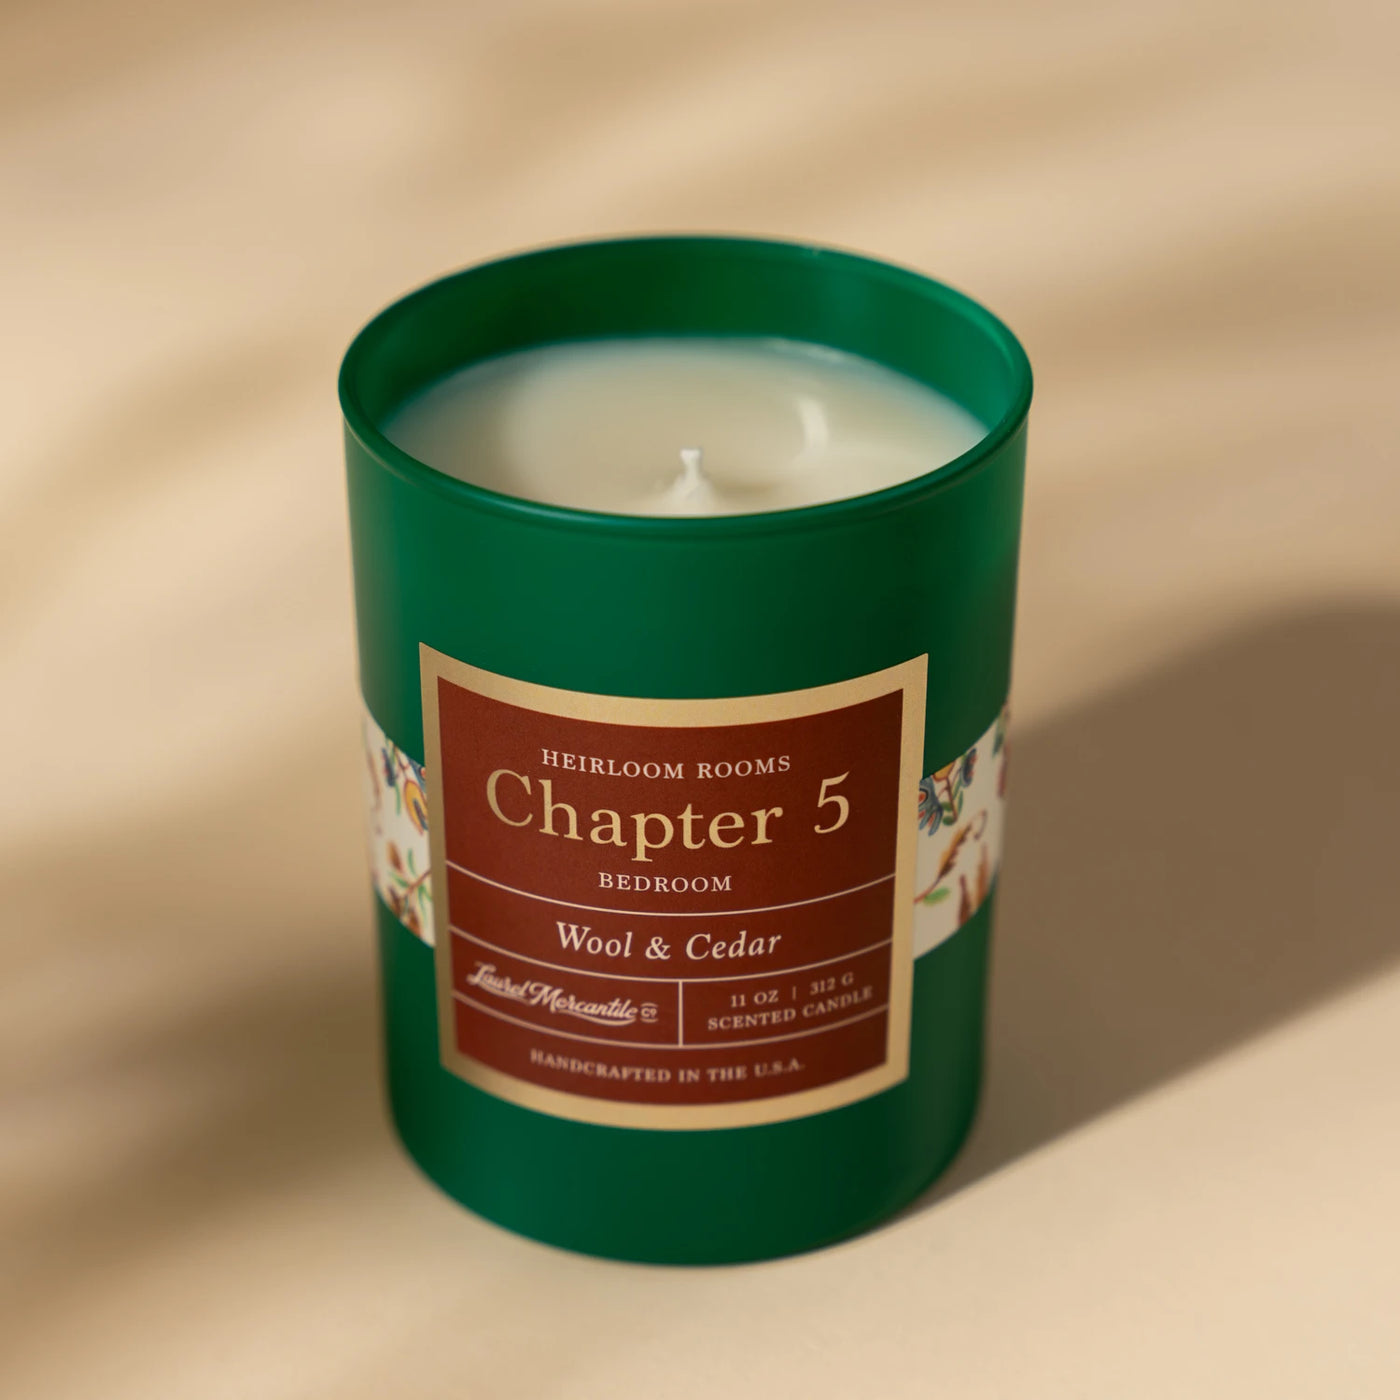 Chapter 5 - Bedroom Candle